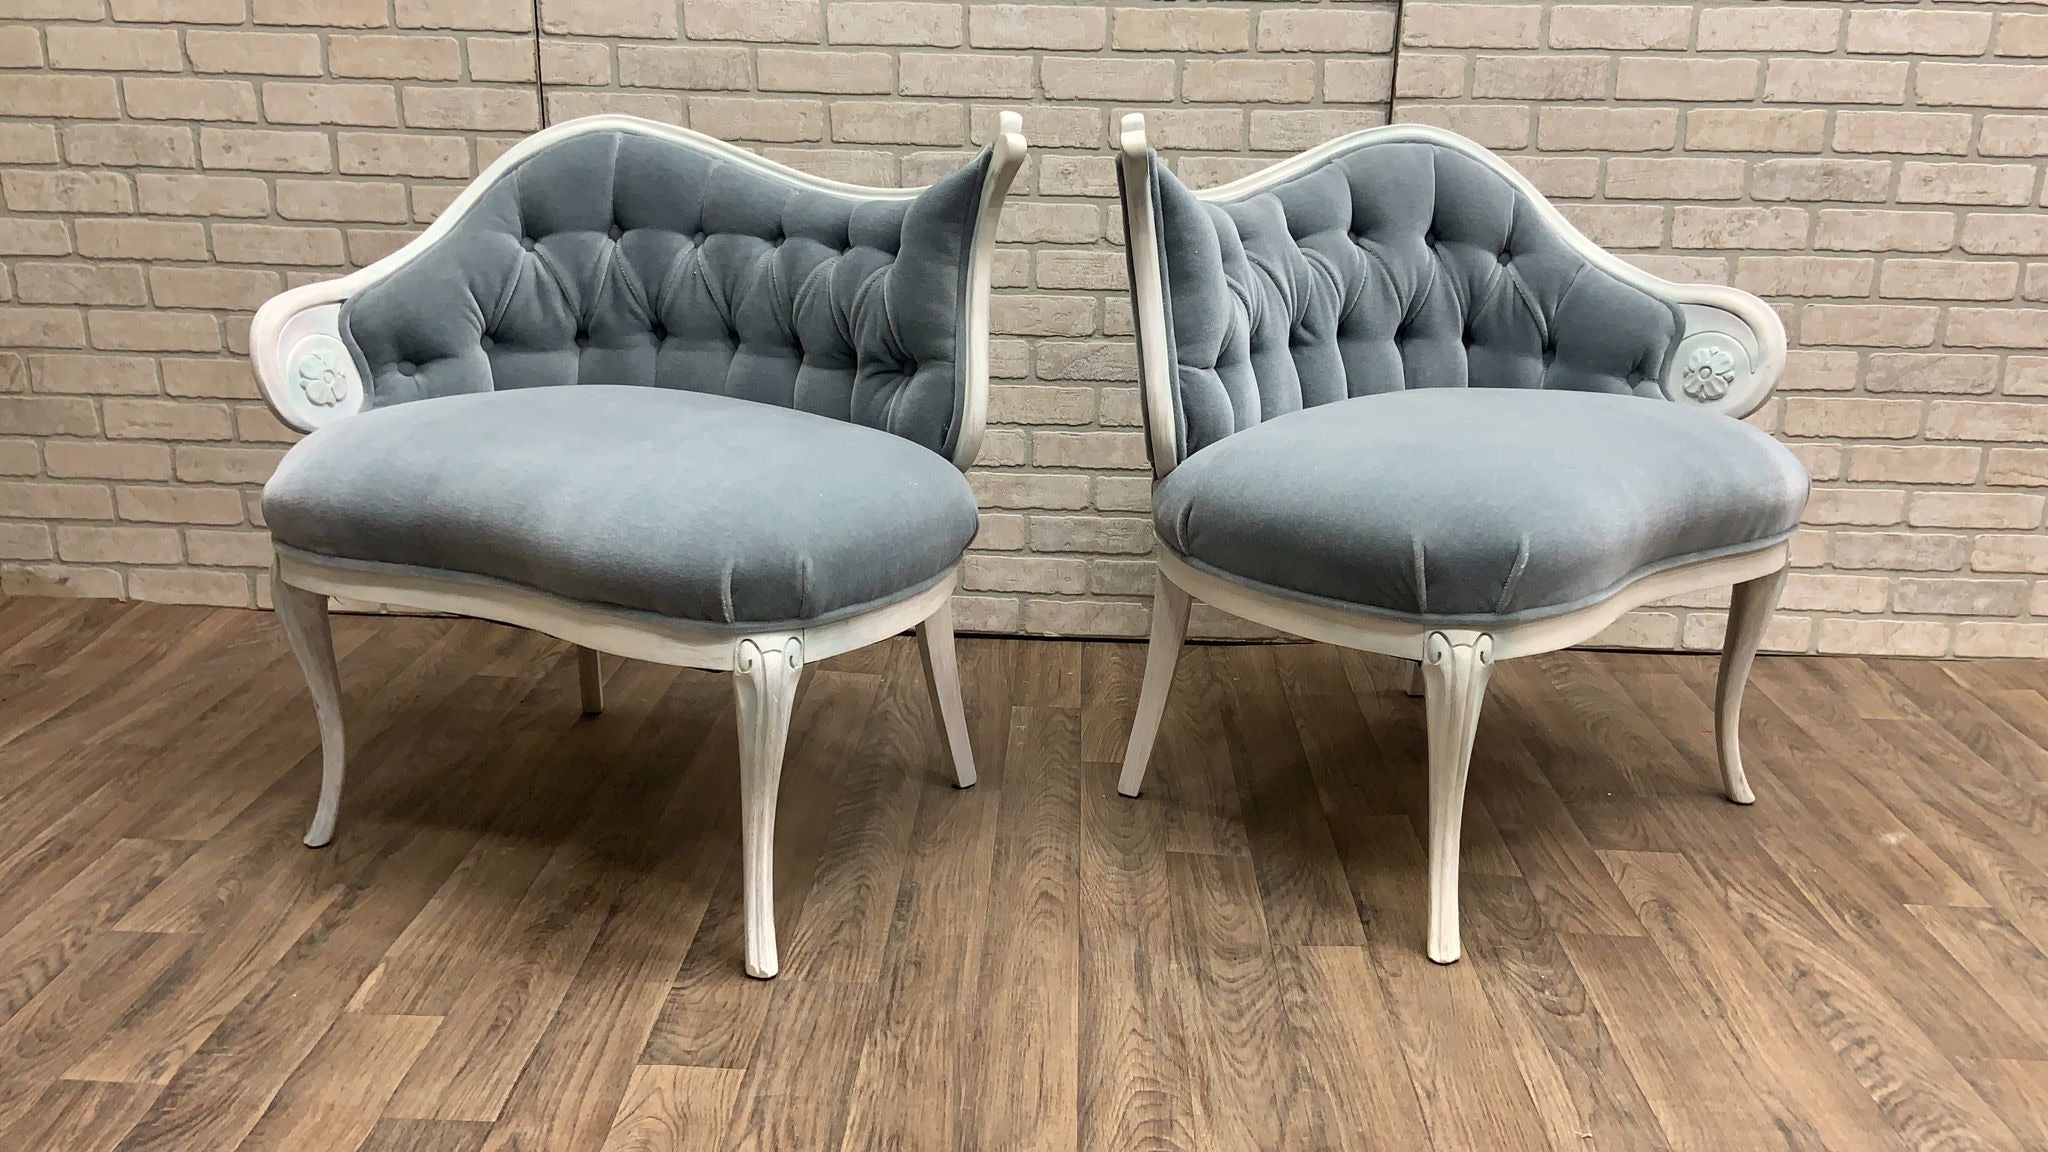 Vintage French Rococo Style Asymmetrical Fireside Chairs Newly Upholstered in Ice Blue Mohair - Pair